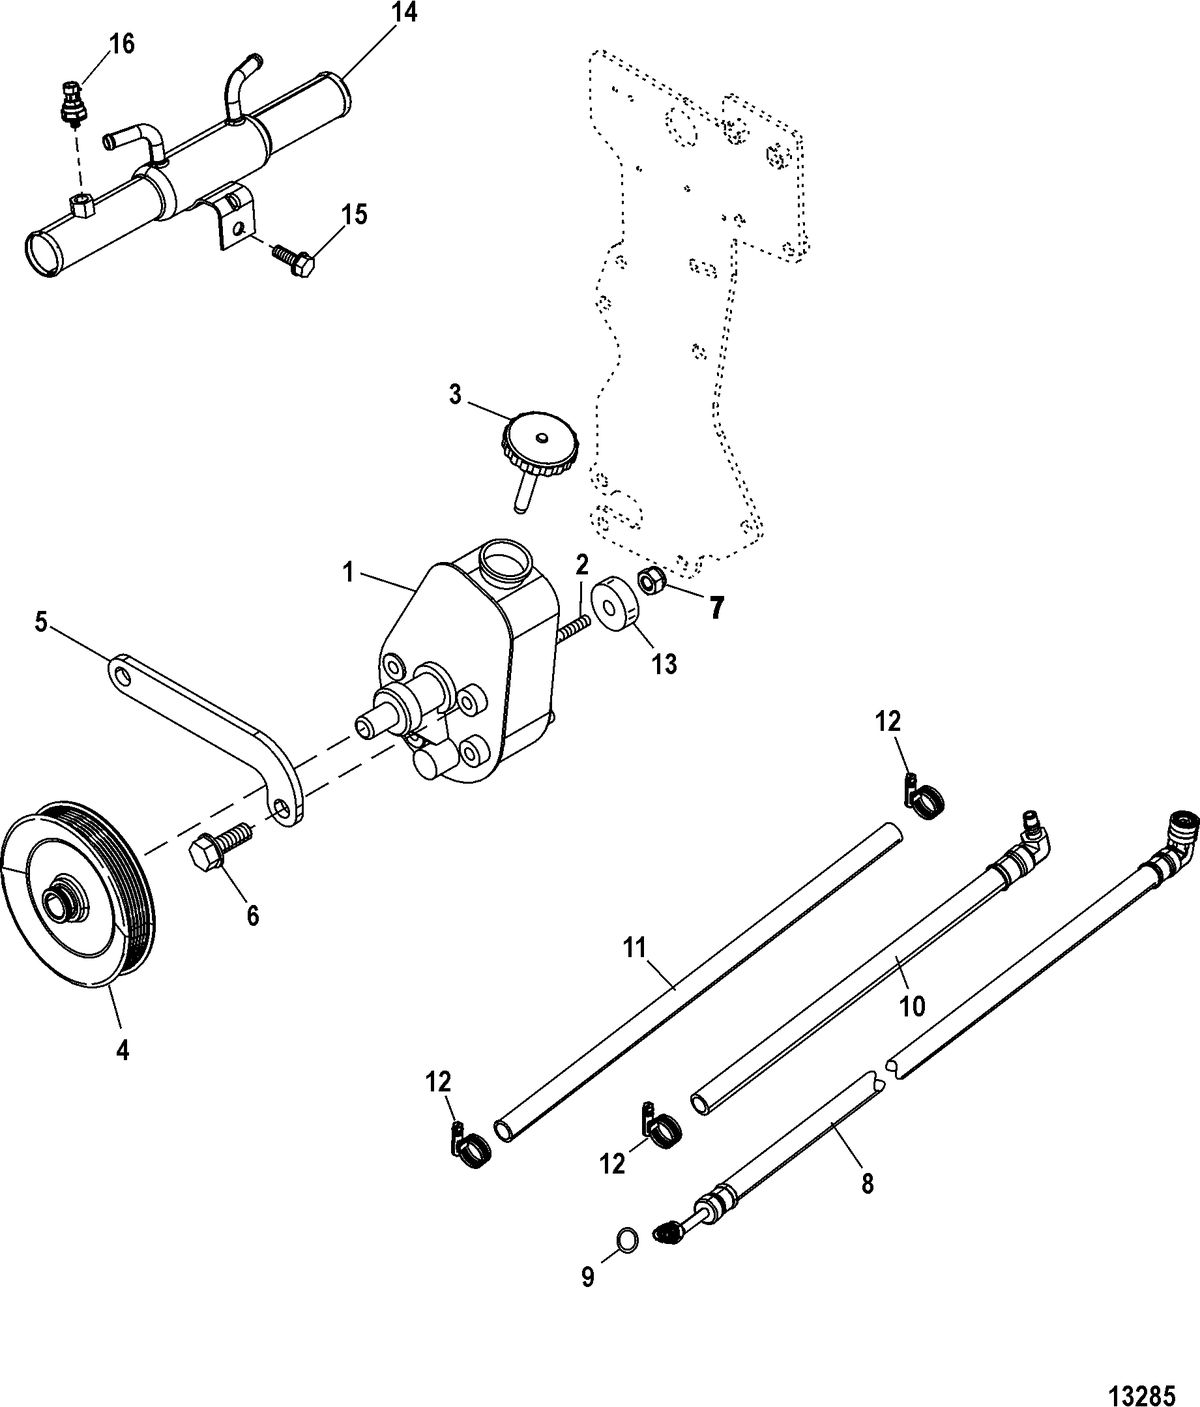 MERCRUISER 5.0, 350, 377 MAG MPI STERNDRIVE Steering Components